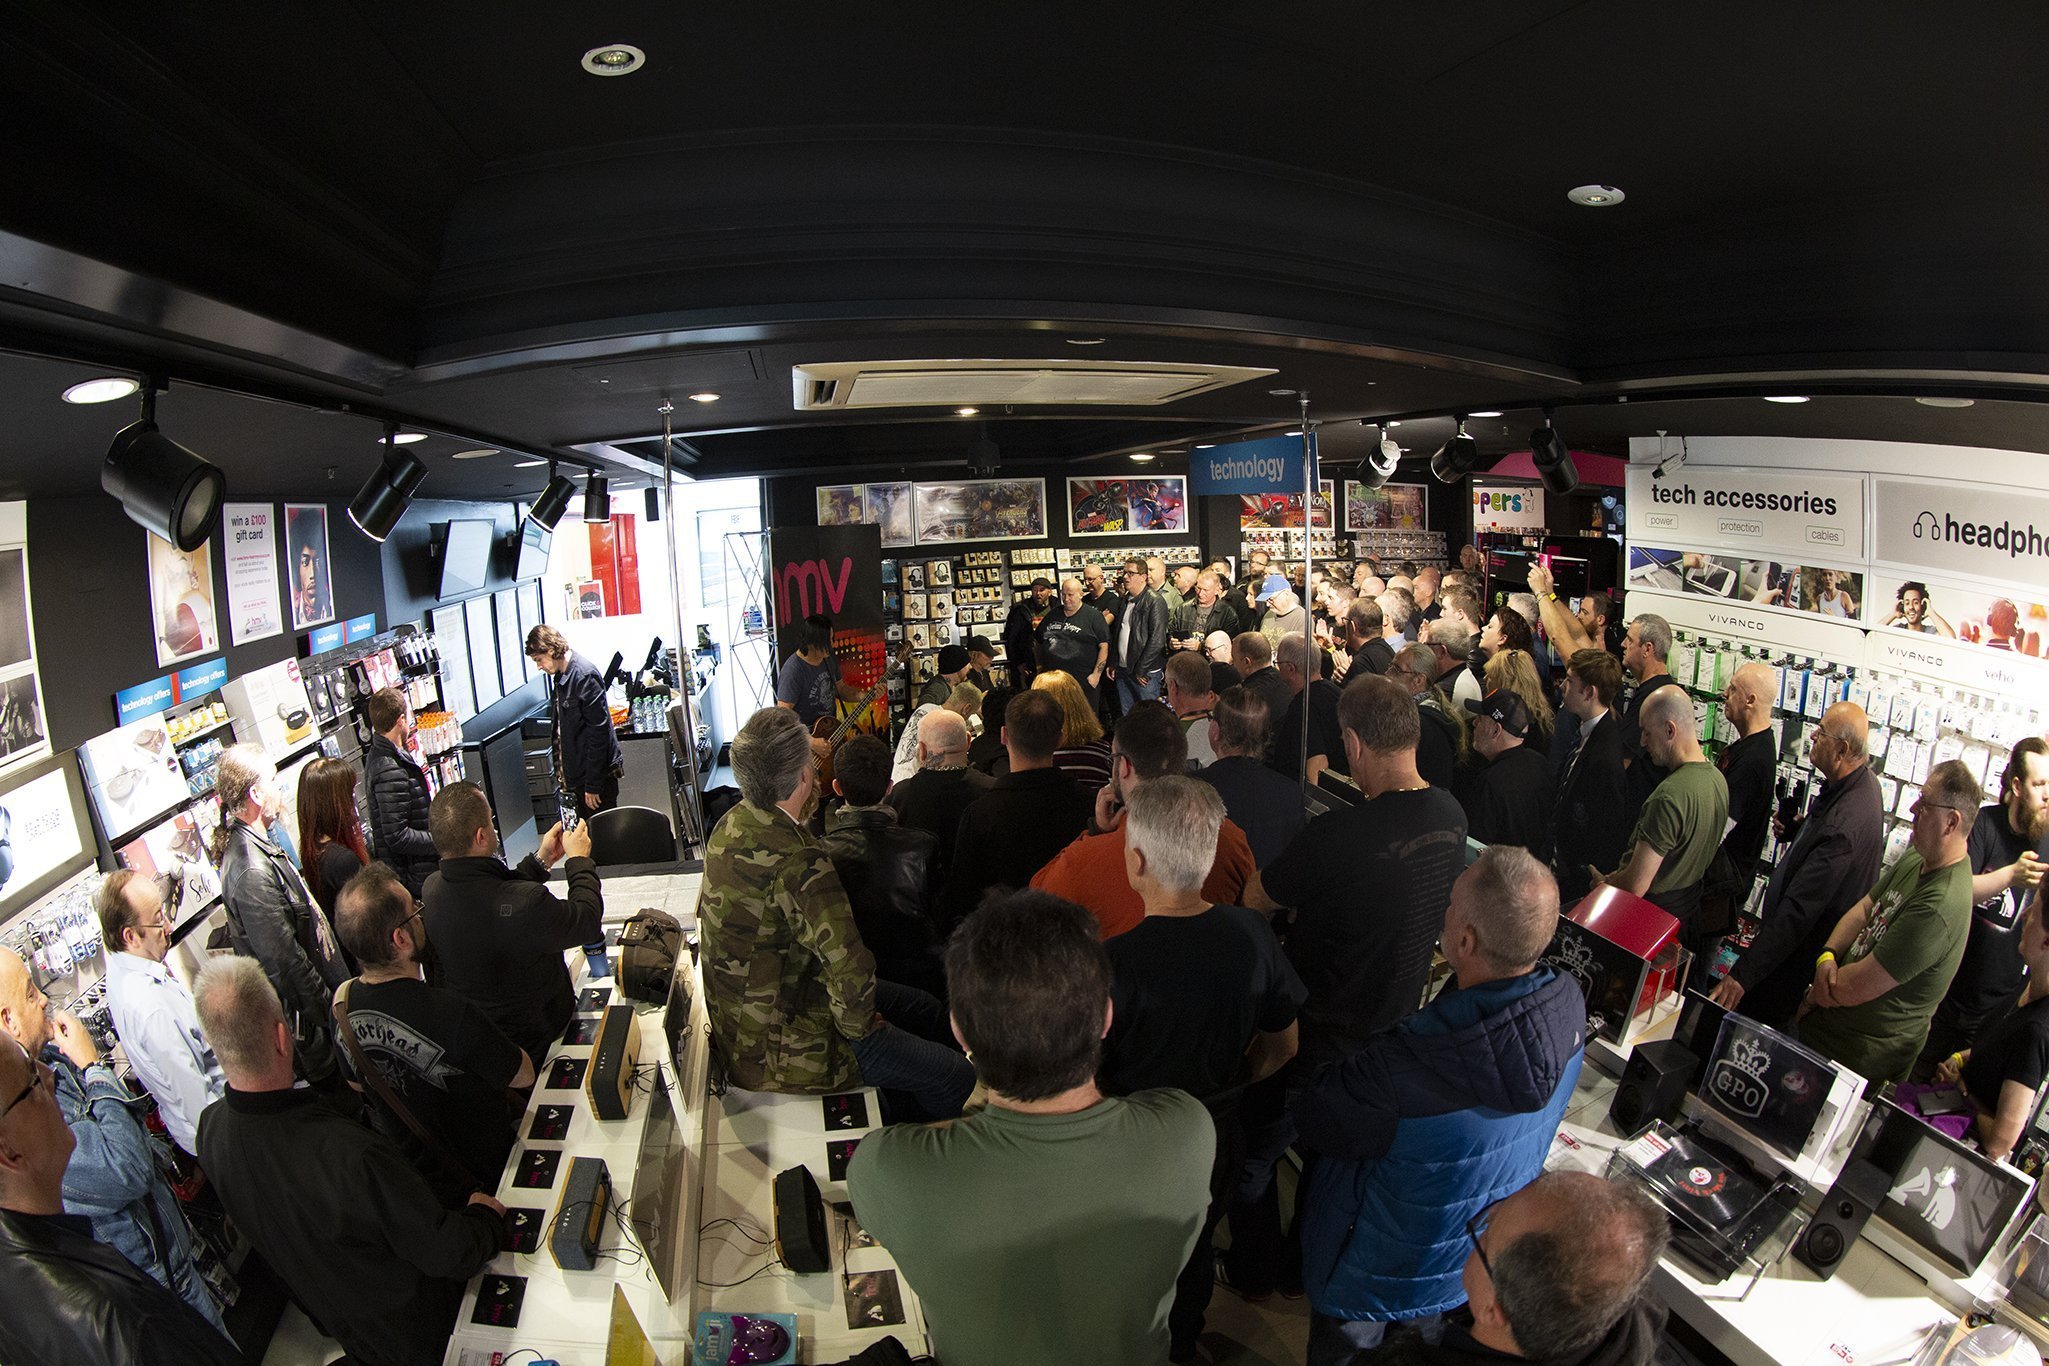 IN FOCUS// Black Star Riders - Live Acoustic Set and Signing - HMV Belfast